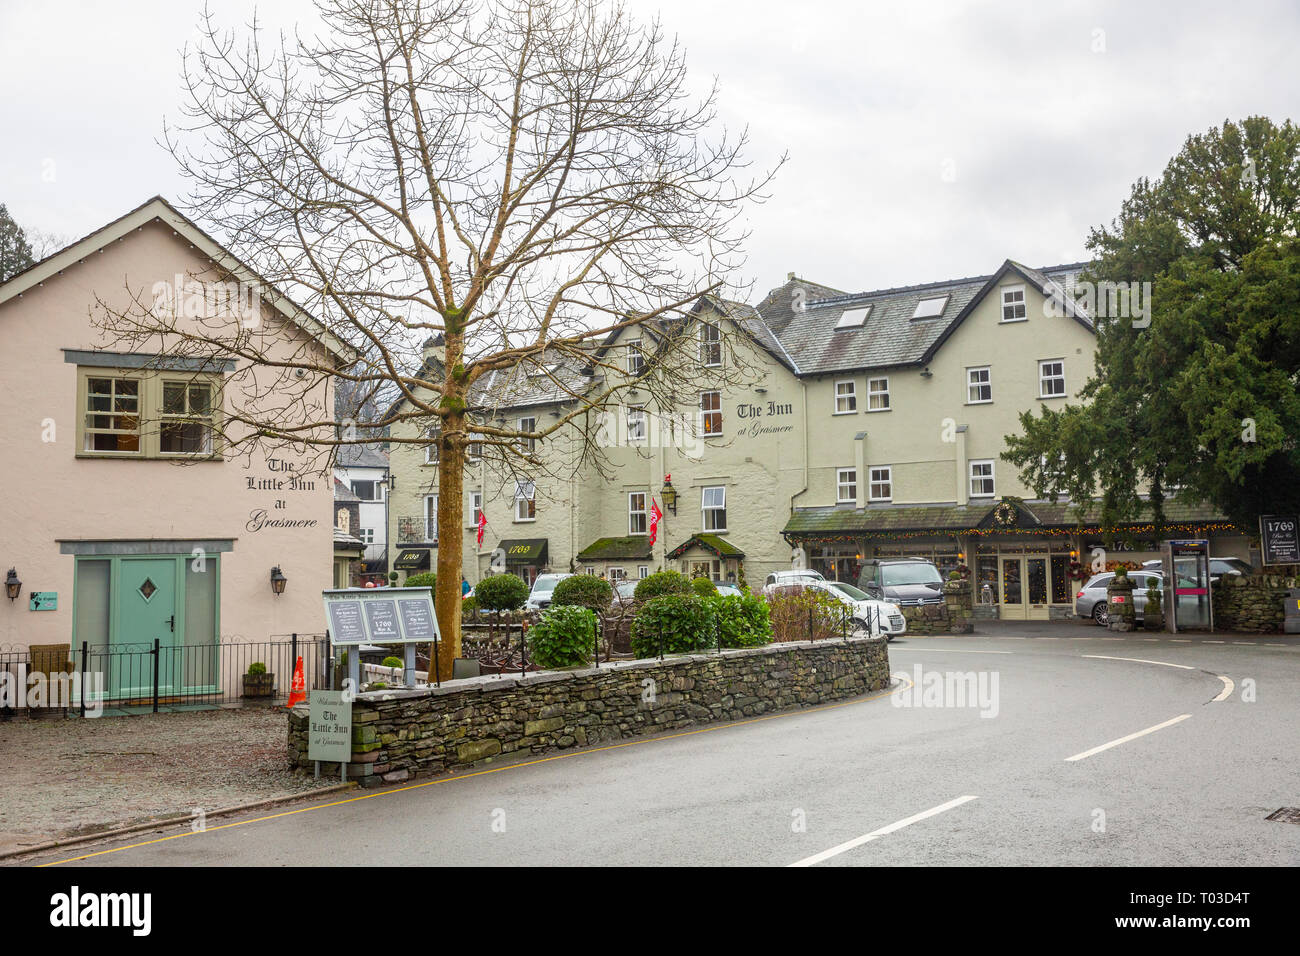 The Inn and Little Inn at Grasmere hotel and restaurants, Grasmere village centre,Lake District,Cumbria,England Stock Photo